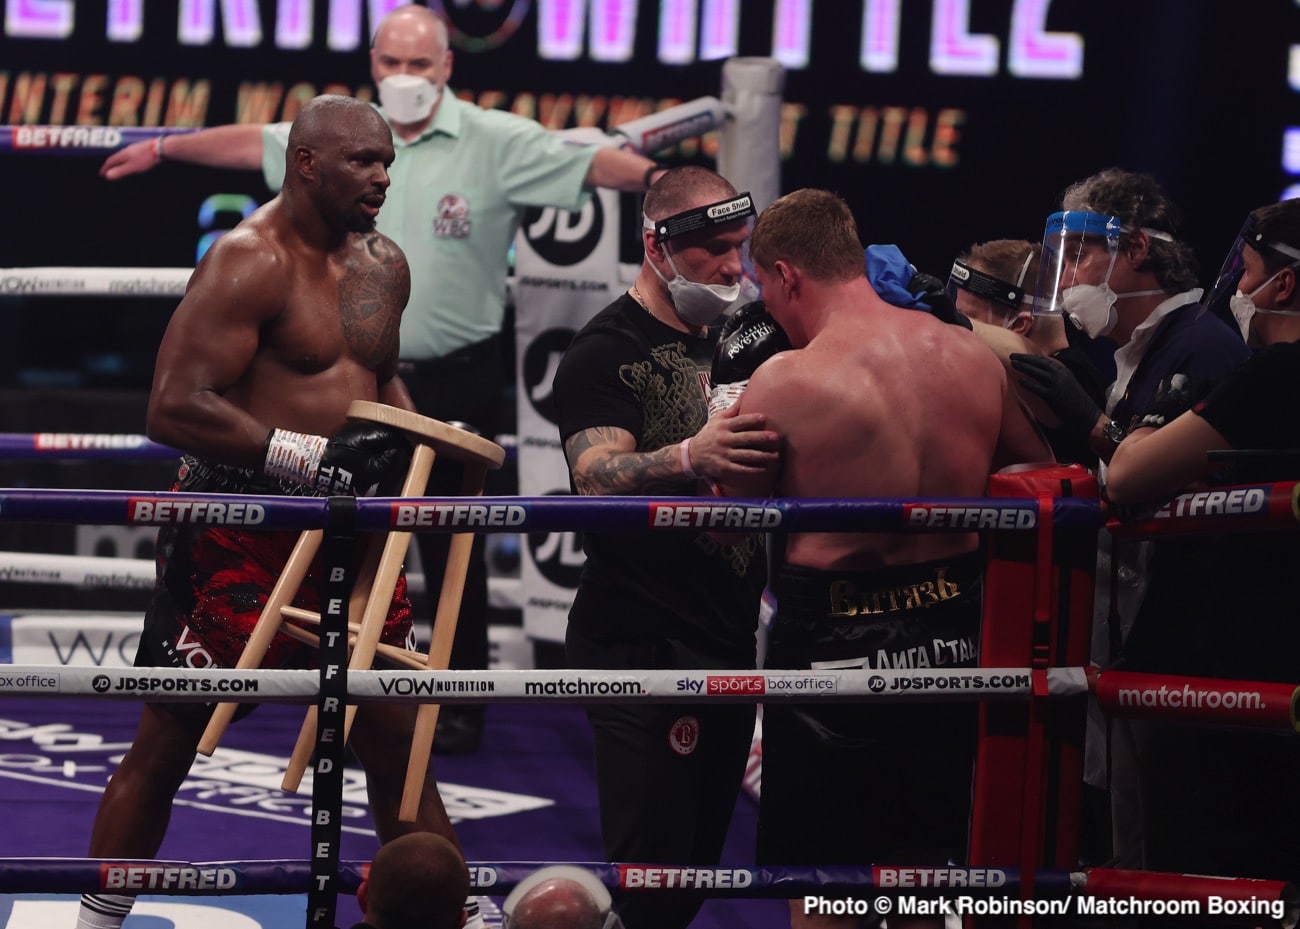 Dillian Whyte offers Povetkin a rematch after stopping him